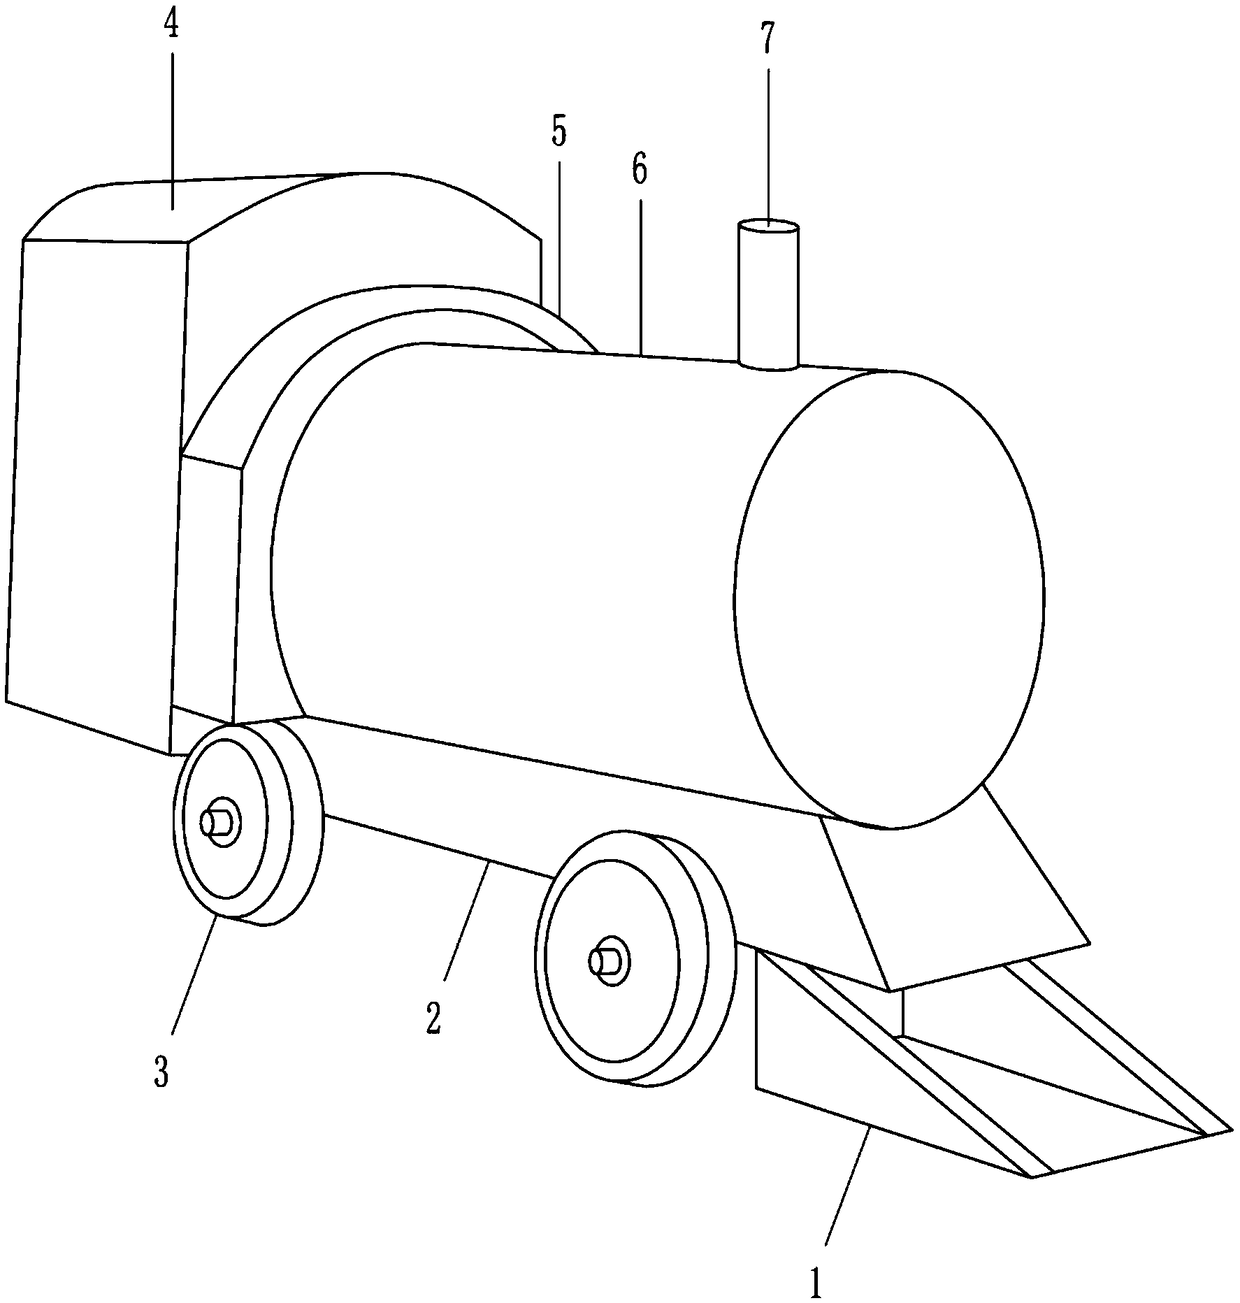 Self-propelled bridge surface cleaning vehicle